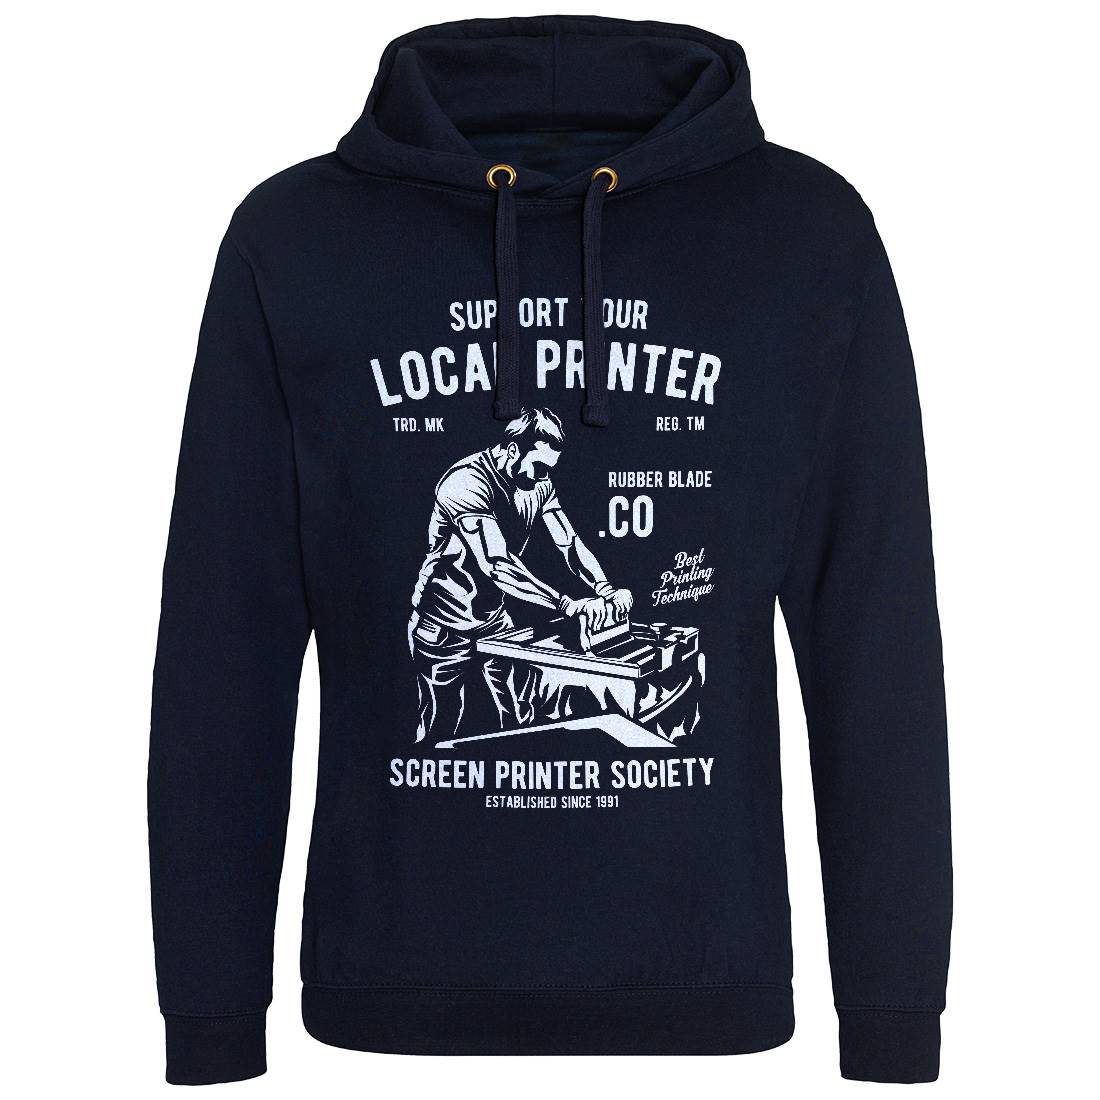 Local Printer Mens Hoodie Without Pocket Work A709